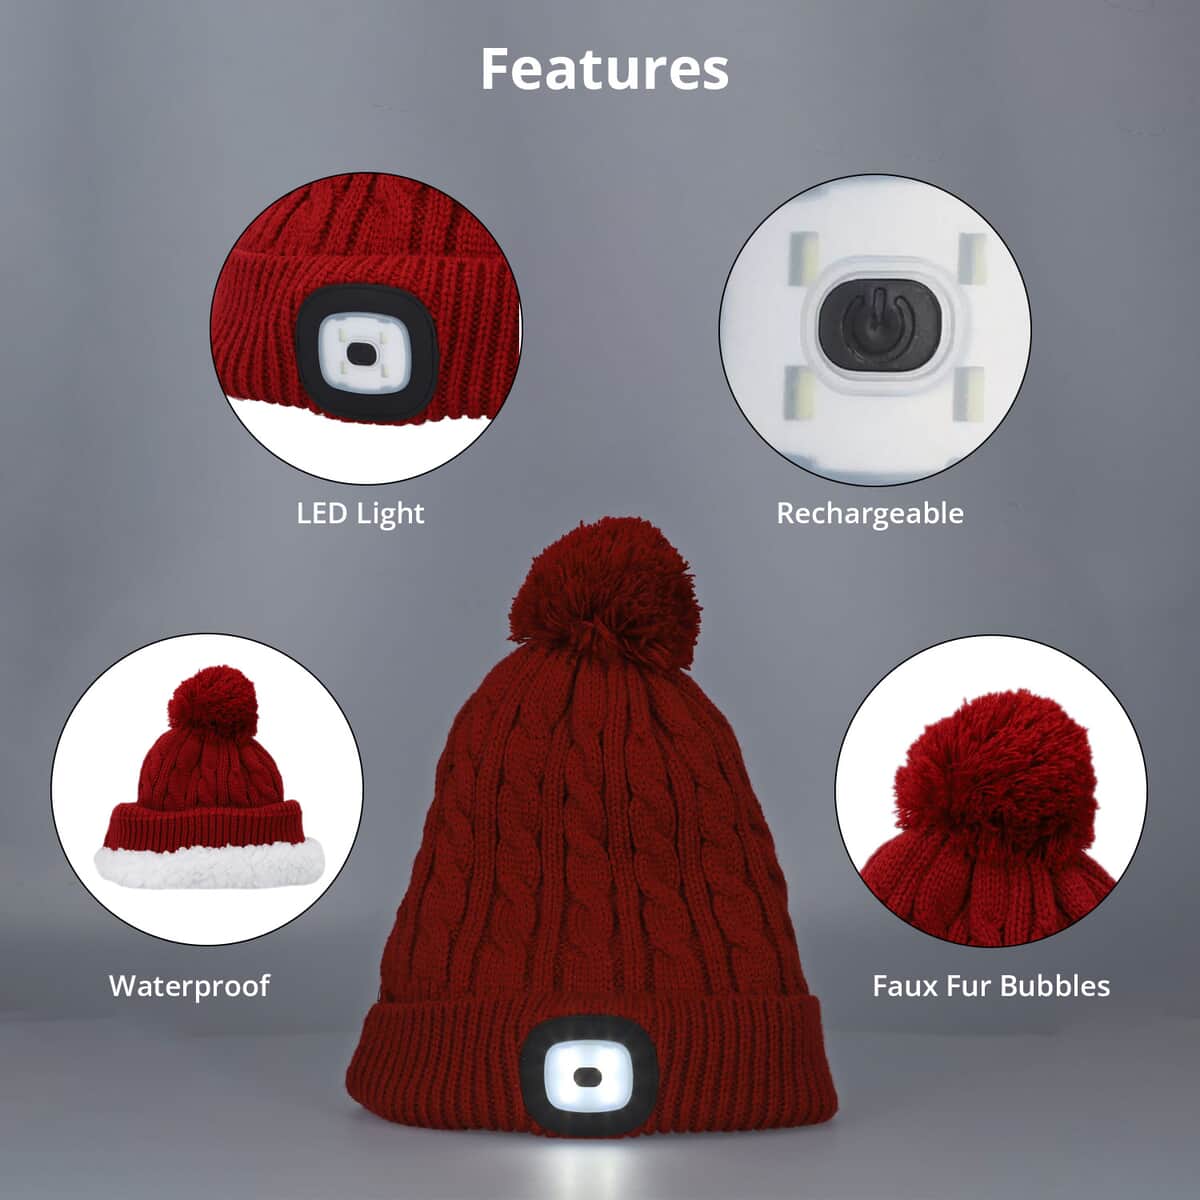 Homesmart Rechargeable Waterproof LED Beanie Hat with Sherpa Lining and Faux Fur Bubbles - Red image number 2